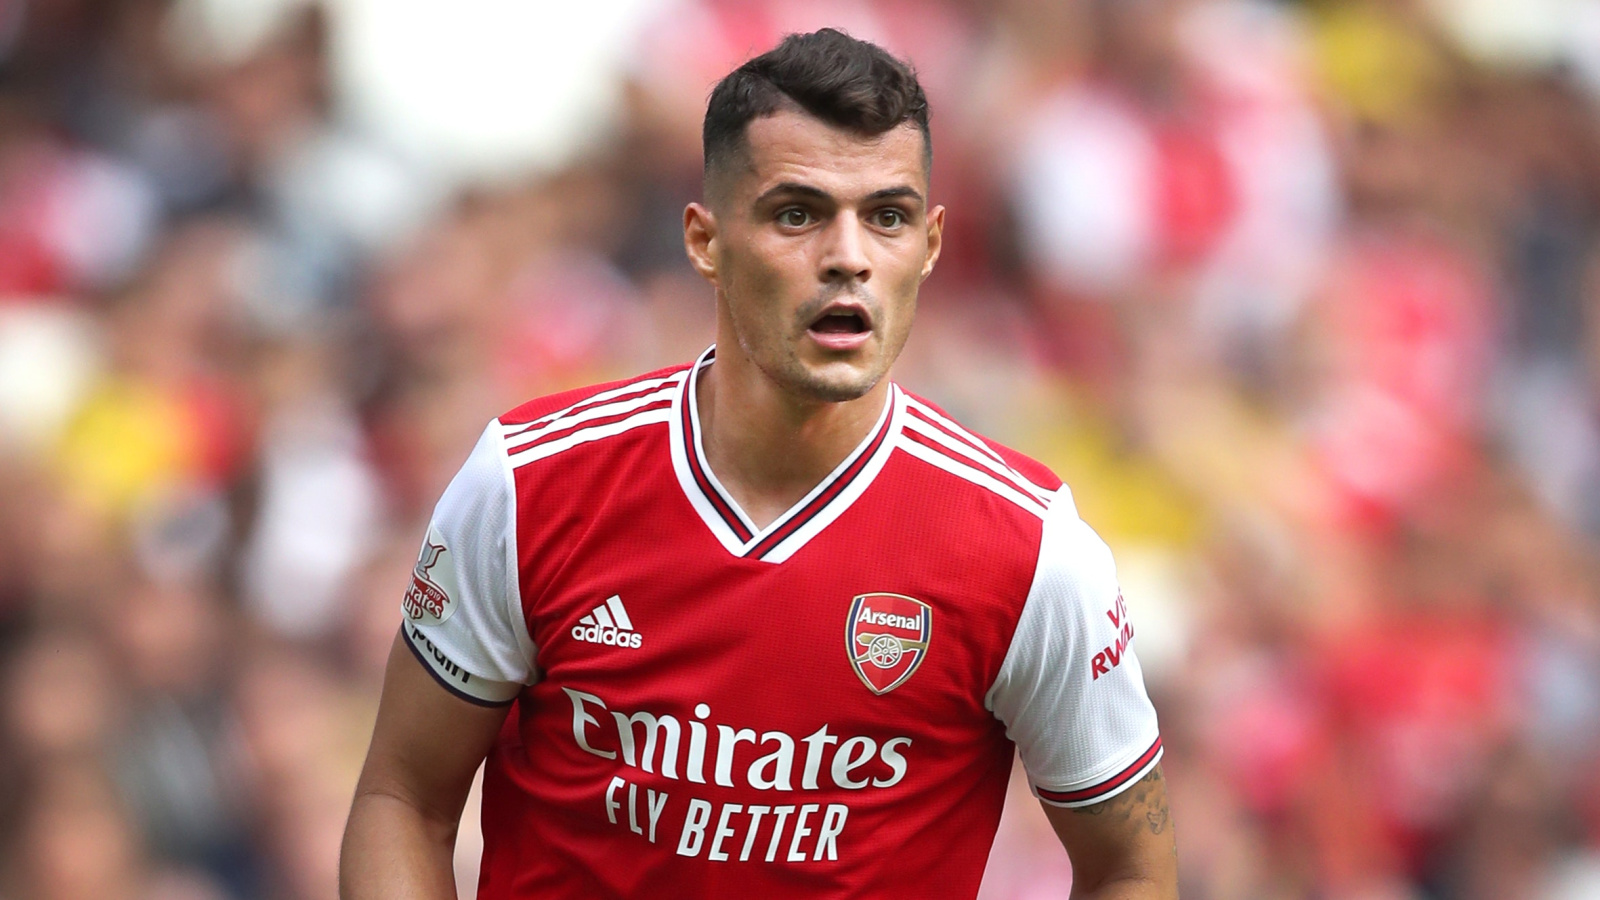 Arsenal captain Granit Xhaka adds himself to a prestigious list with 8 other footballers including Lionel Messi